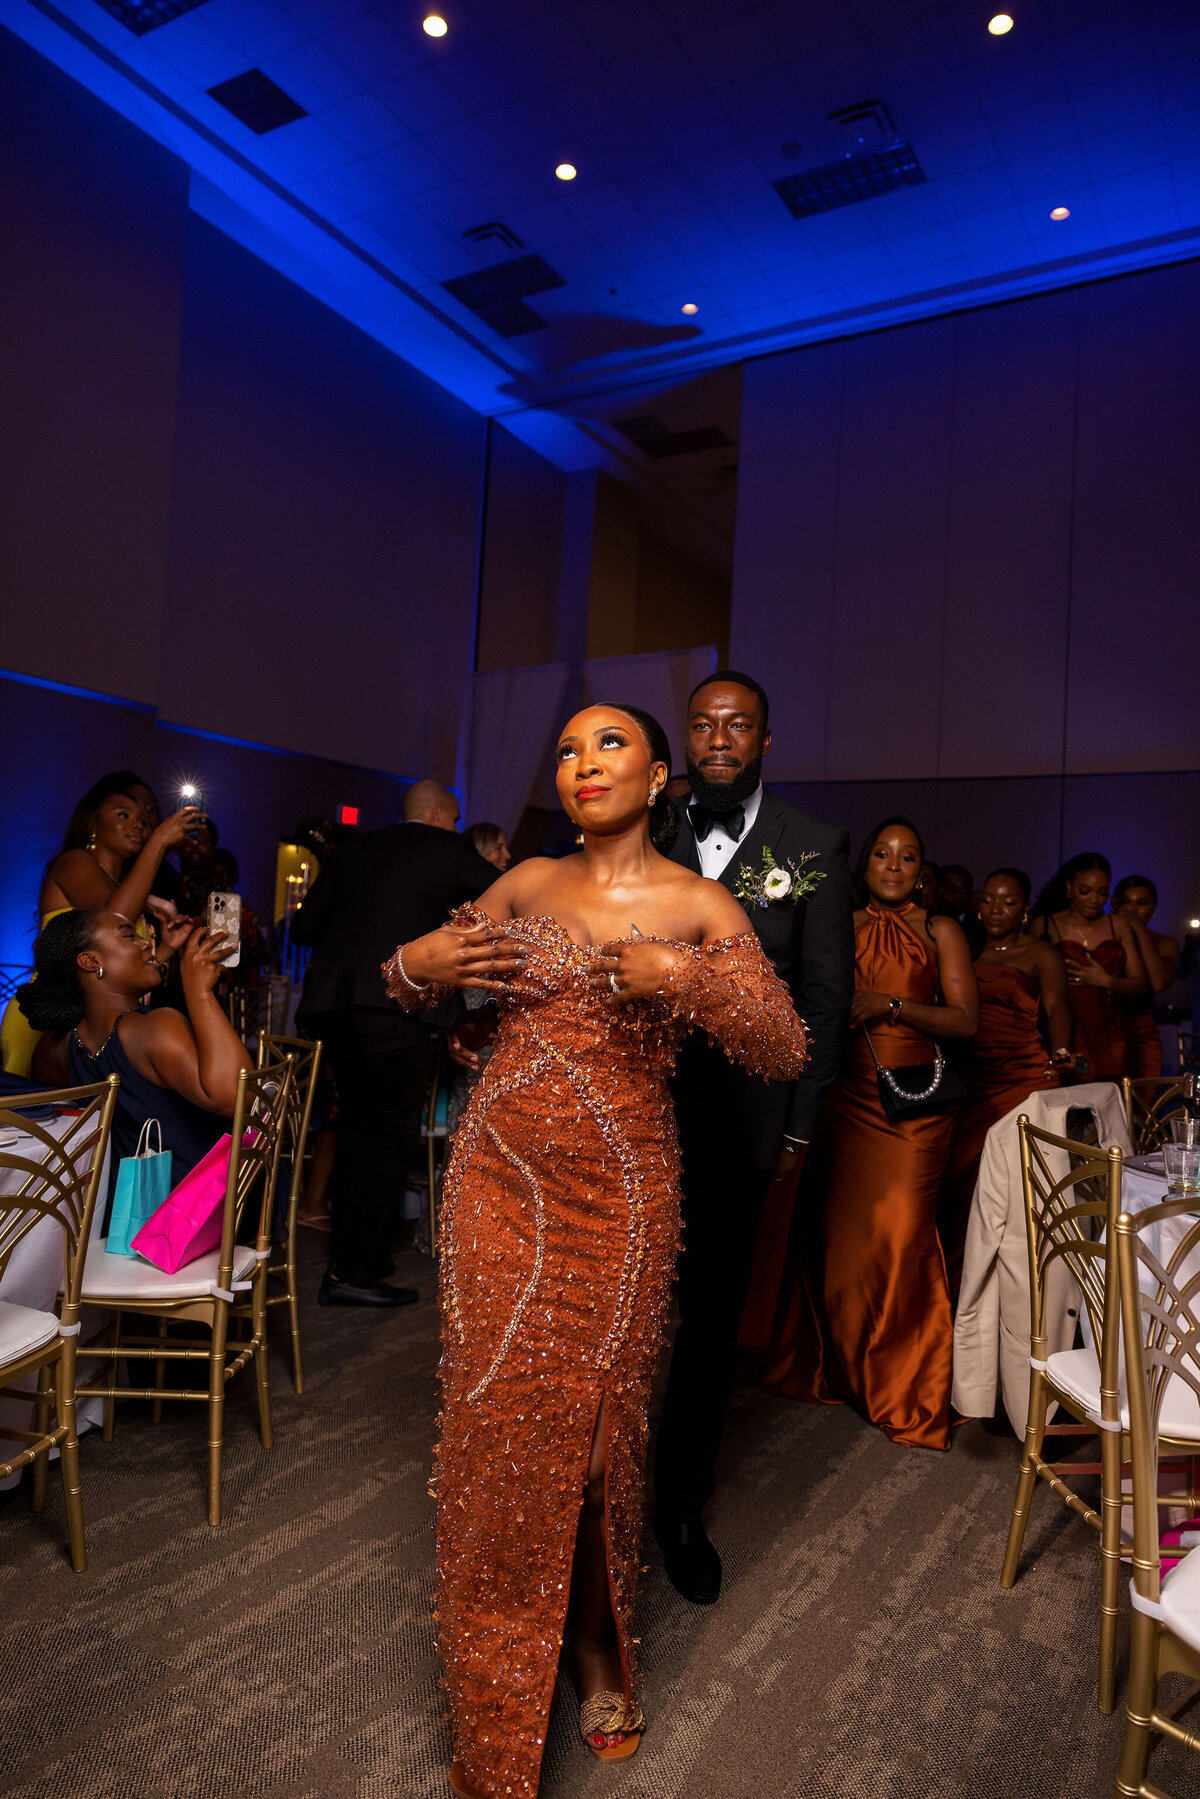 Tomi and Tolu Oruka Events Ziggy on the Lens photographer Wedding event planners Toronto planner African Nigerian Eyitayo Dada Dara Ayoola ottawa convention and event centre pocket flowers Navy blue groom suit ball gown black bride classy  192